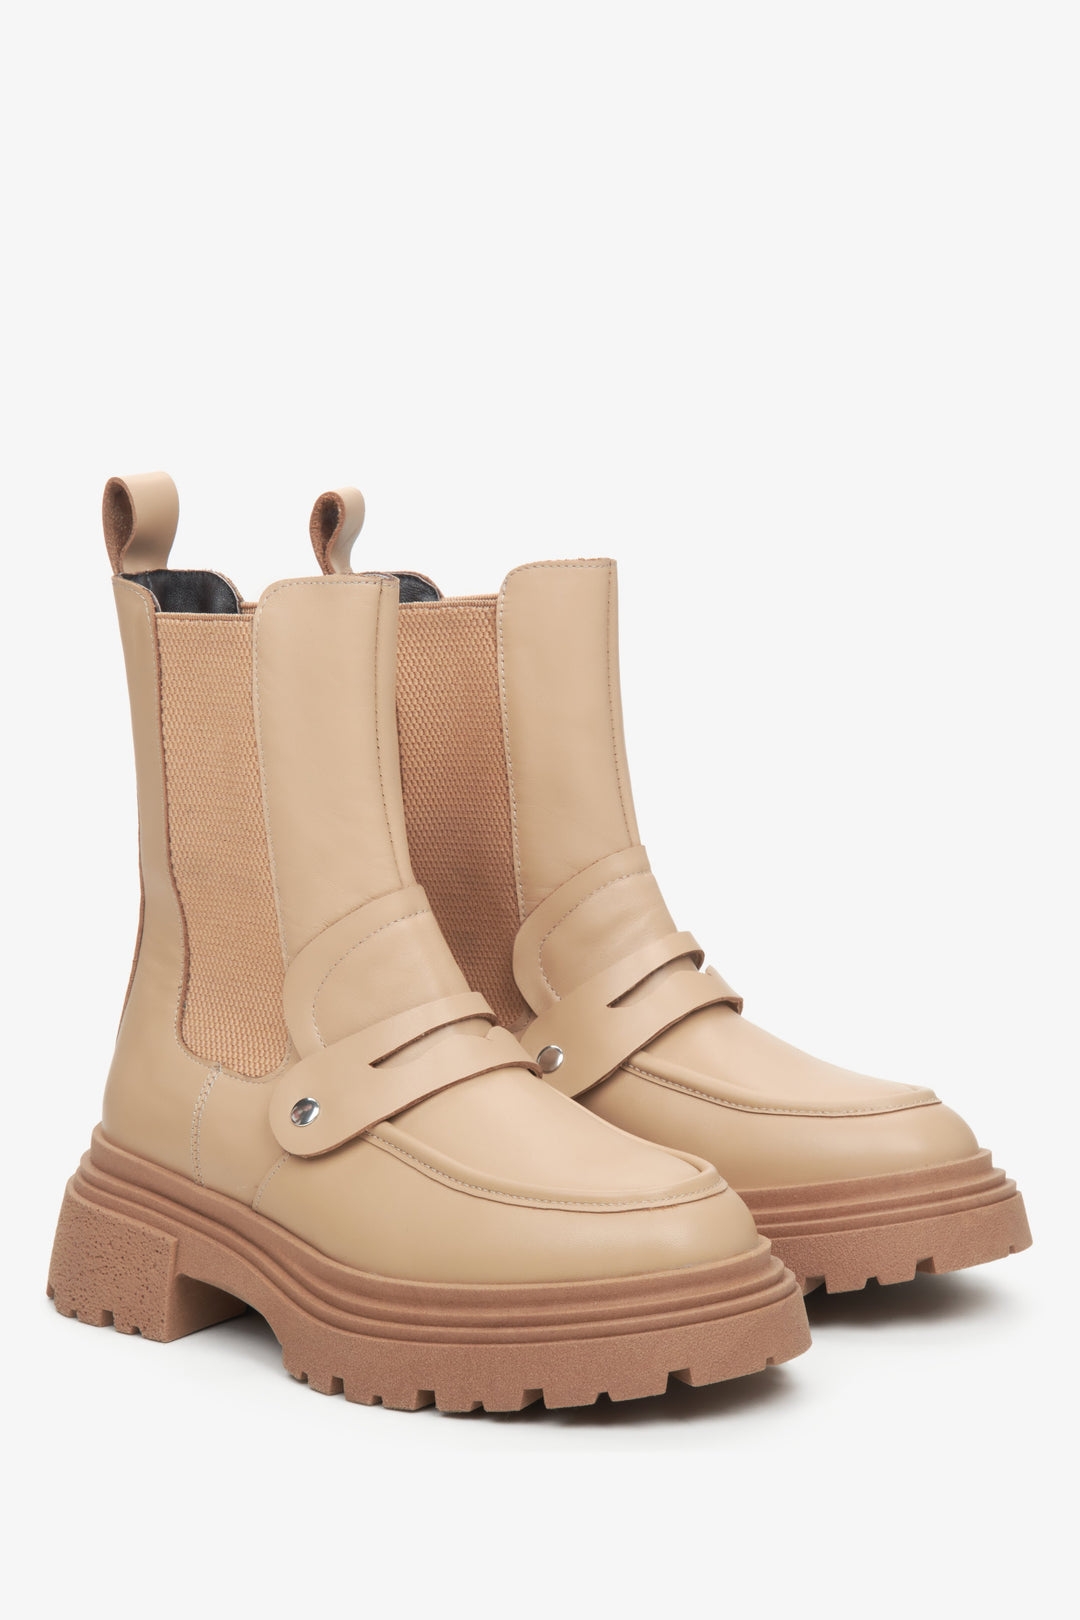 Women's beige leather Chelsea boots by Estro with embellishment.